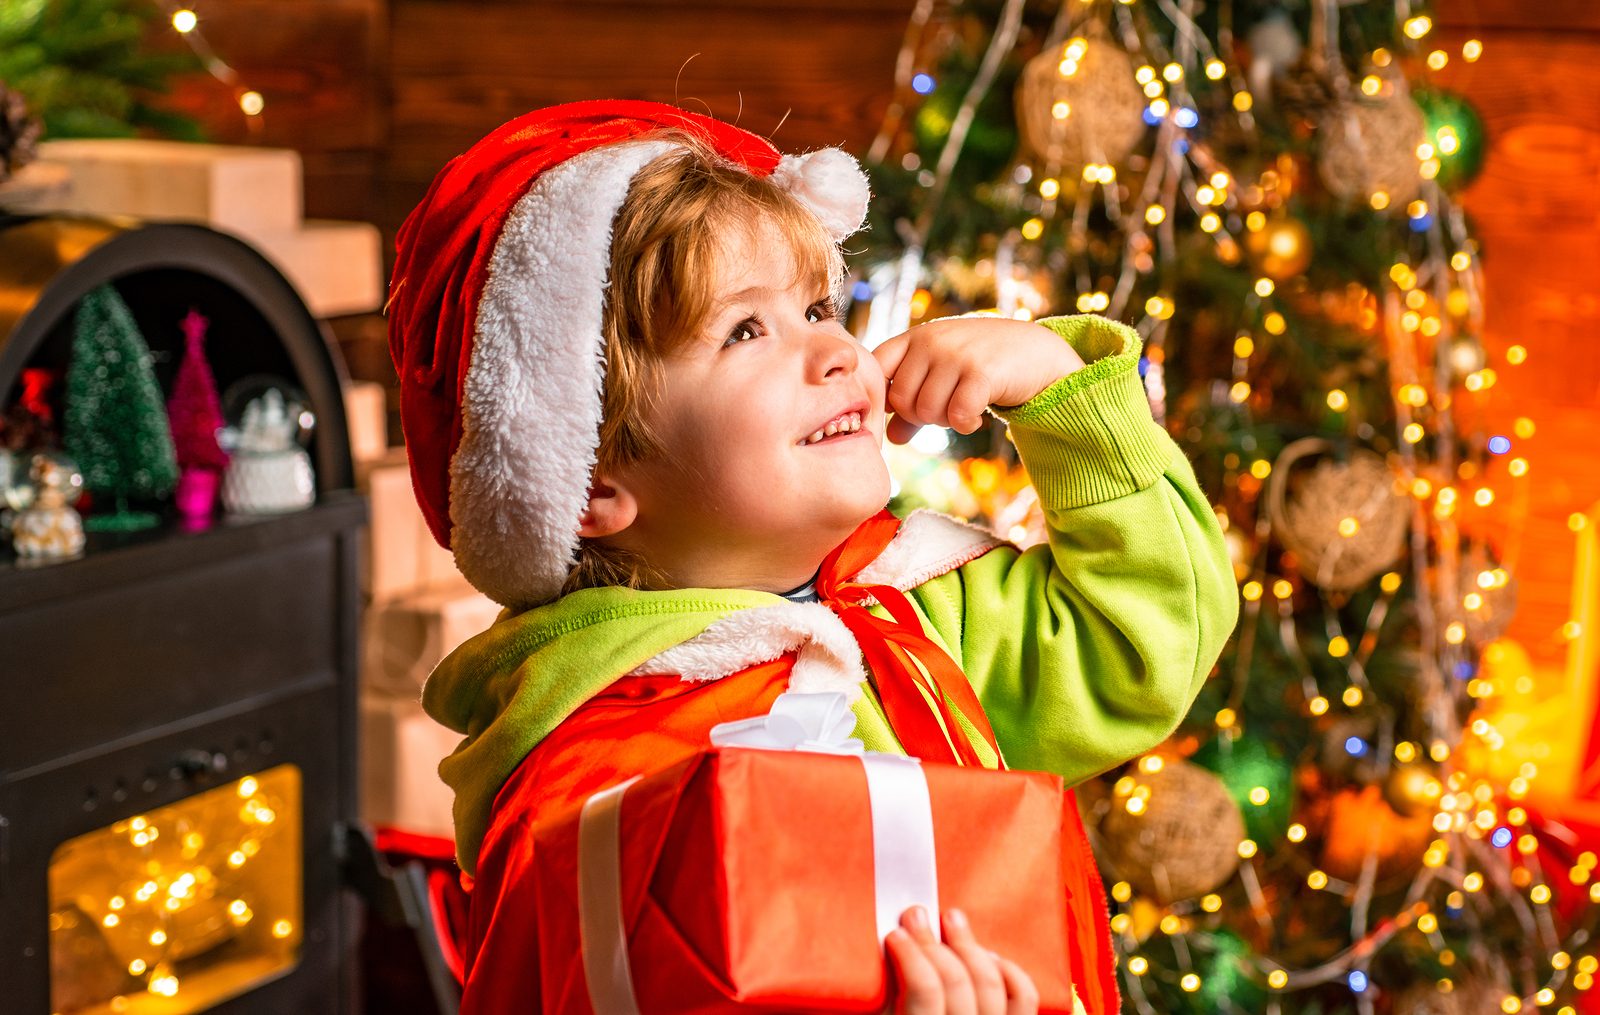 Photo of a Child Under a Christmas Tree